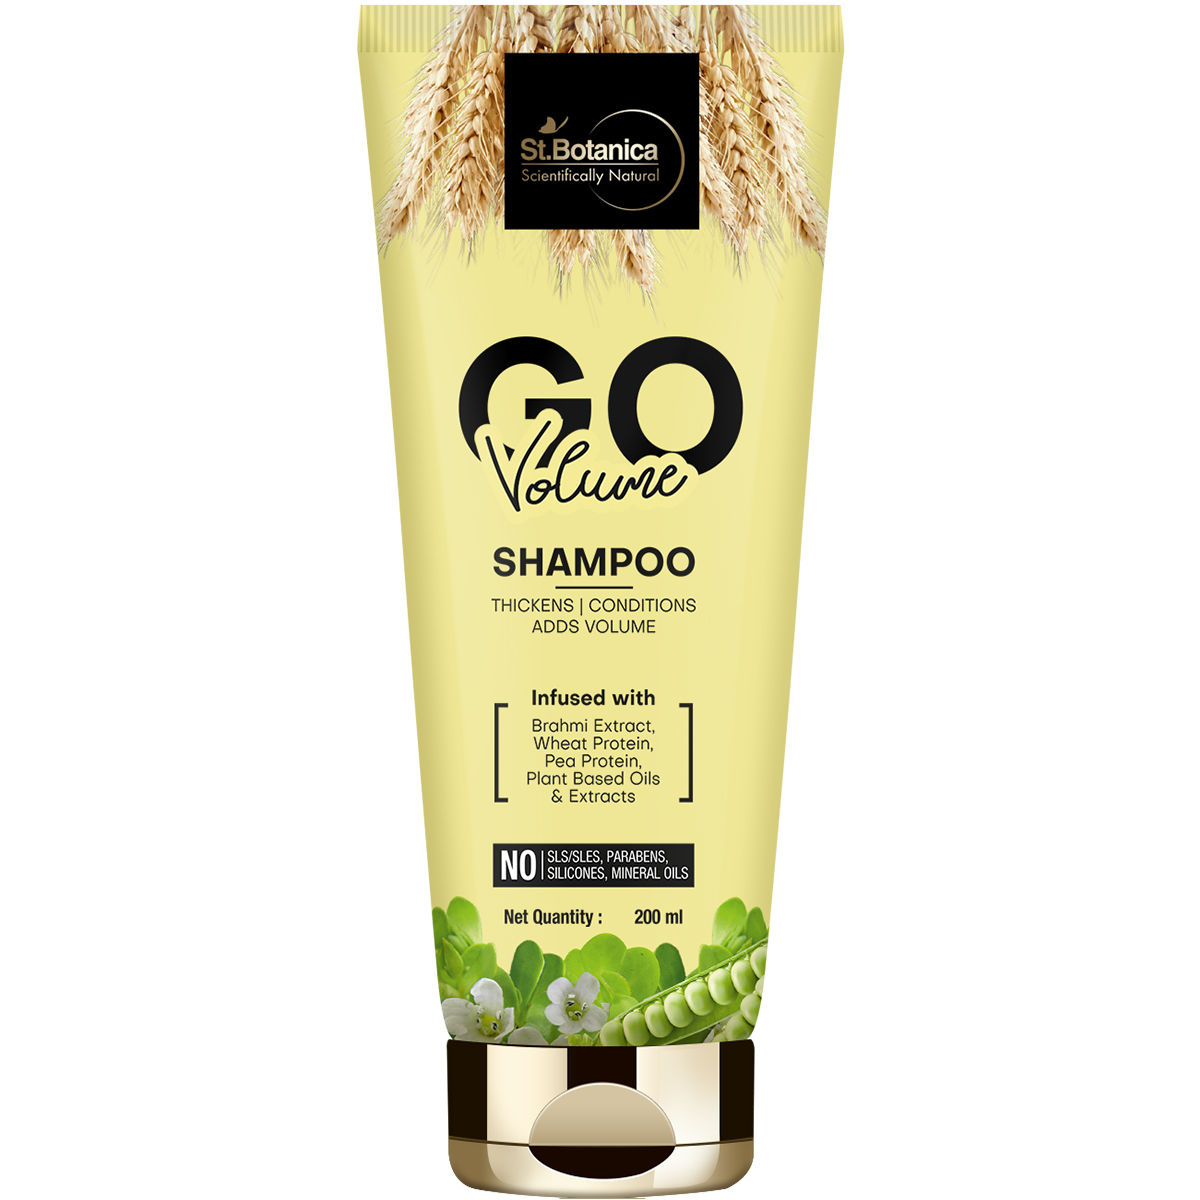 StBotanica GO Volume Hair Shampoo - With Brahmi Extract, Wheat Protein, No Sulphate, Silicone